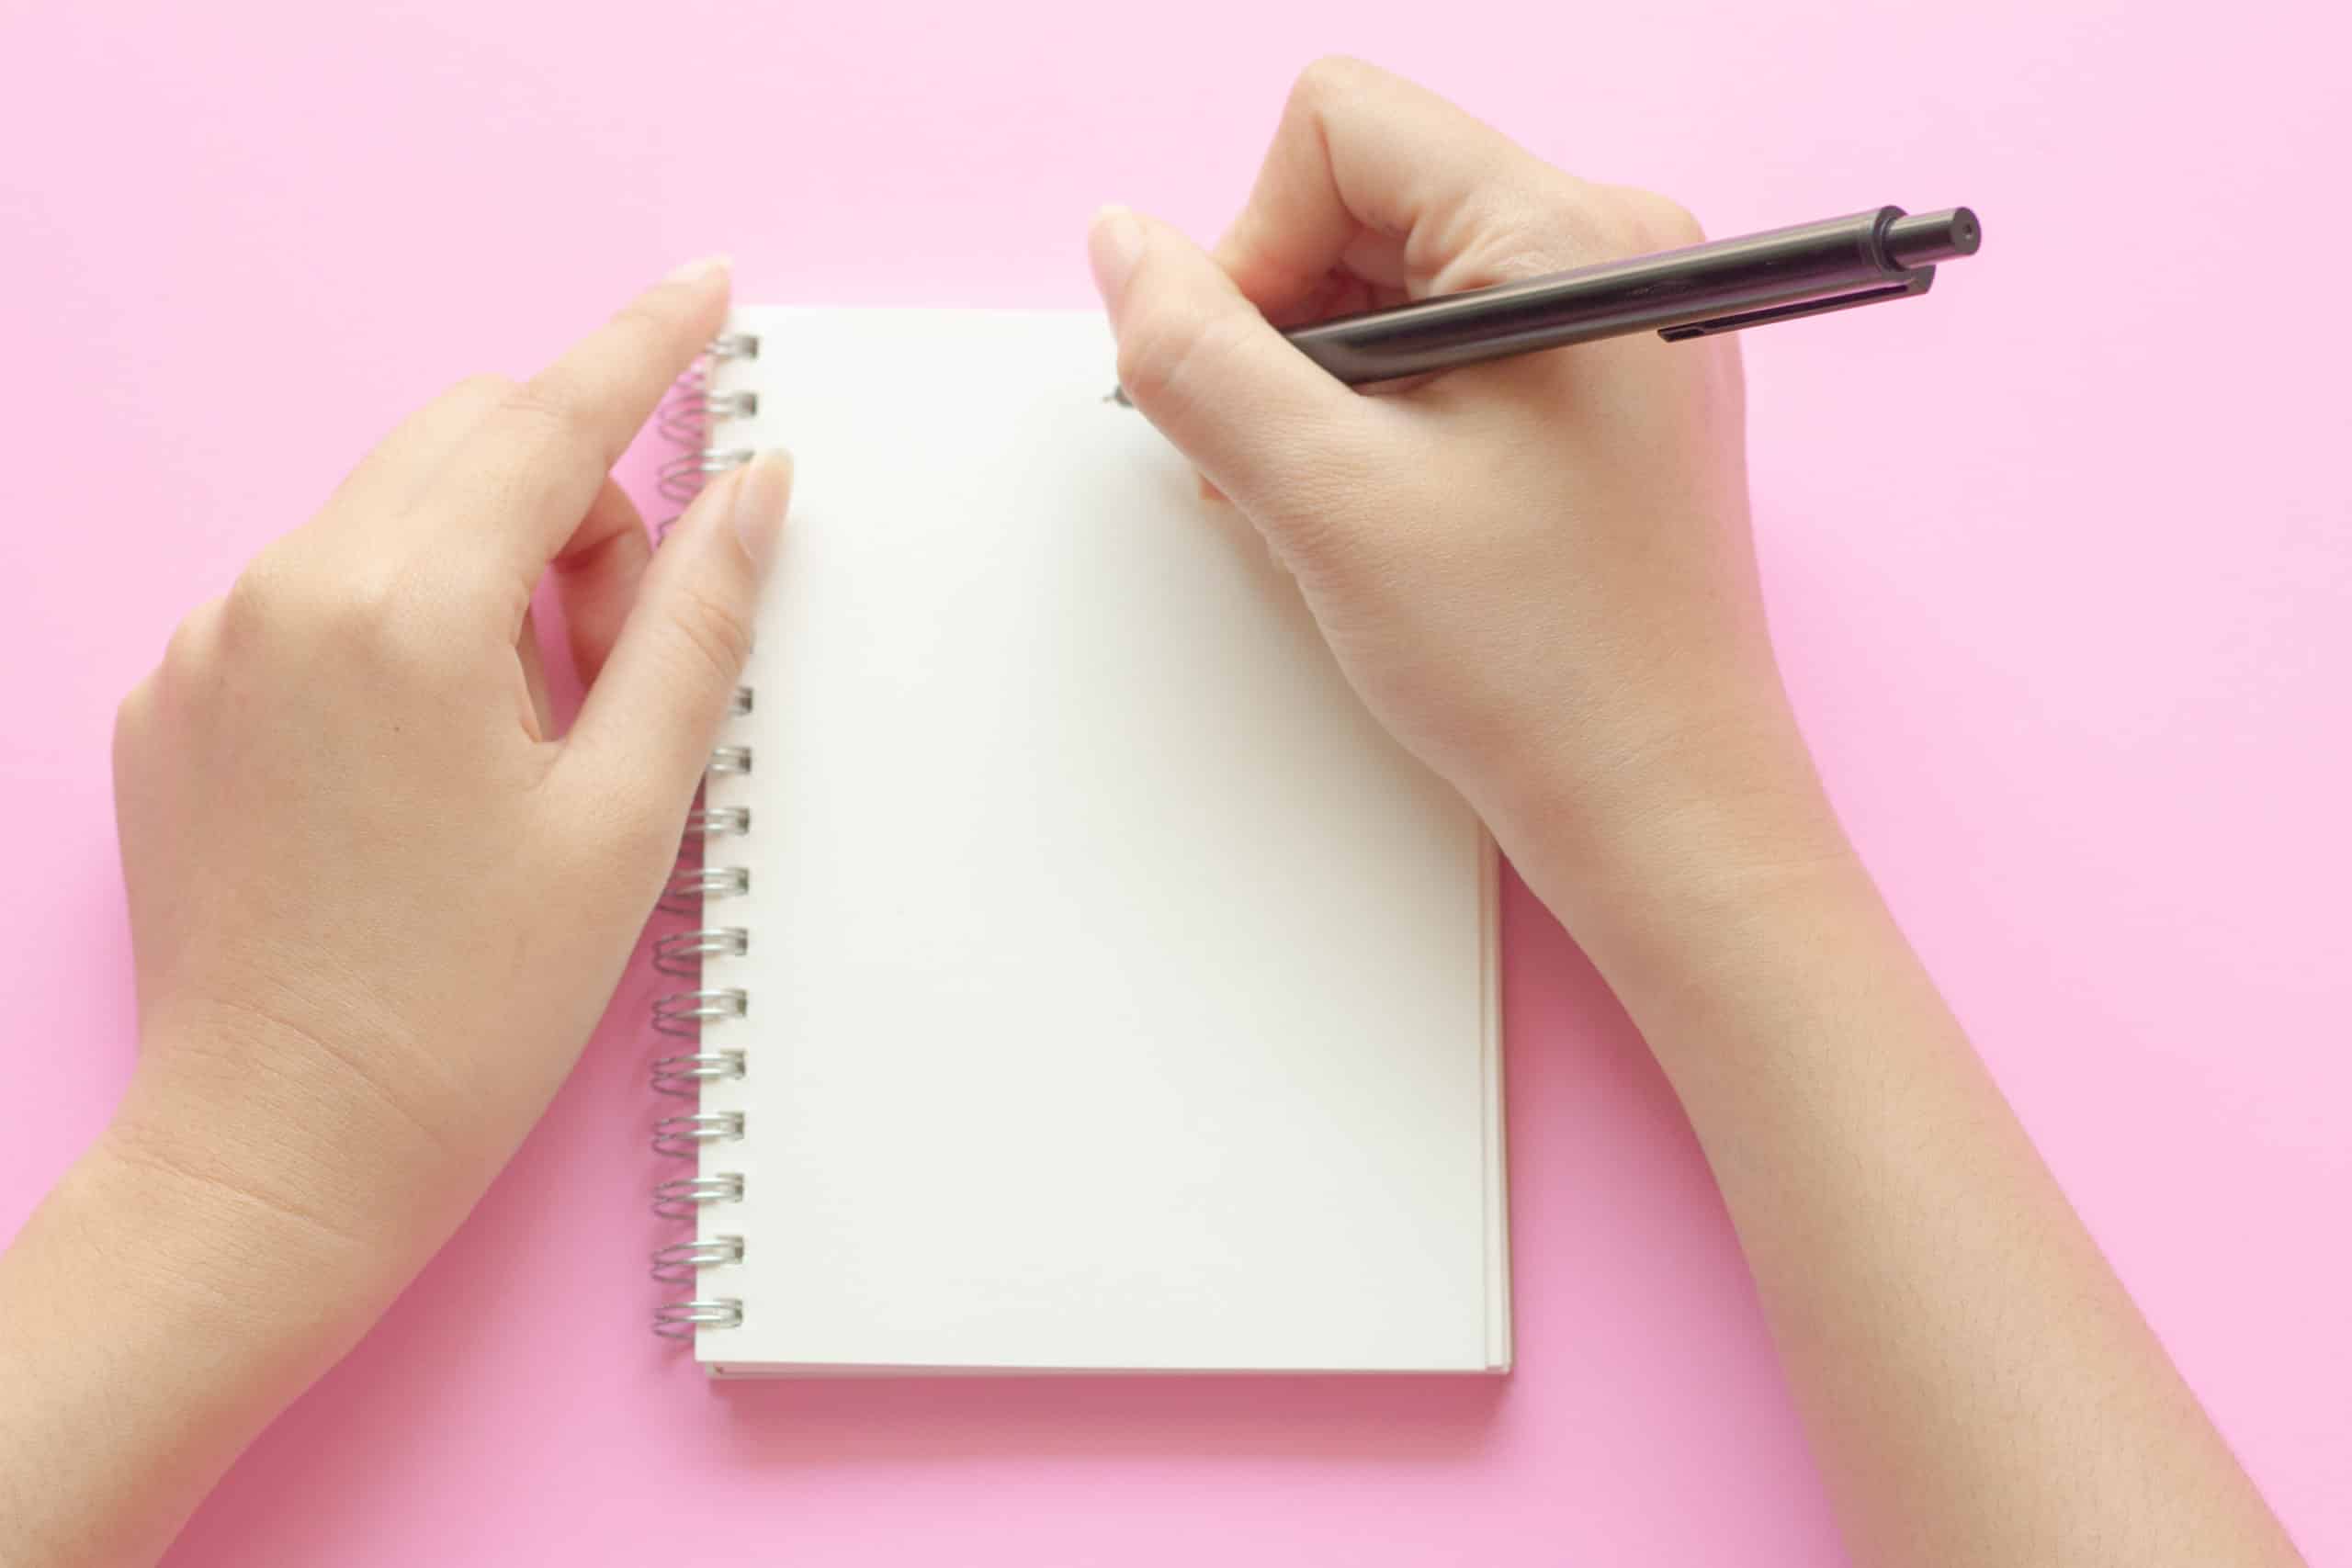 woman's hands writing in empty notebook at the pink desk.